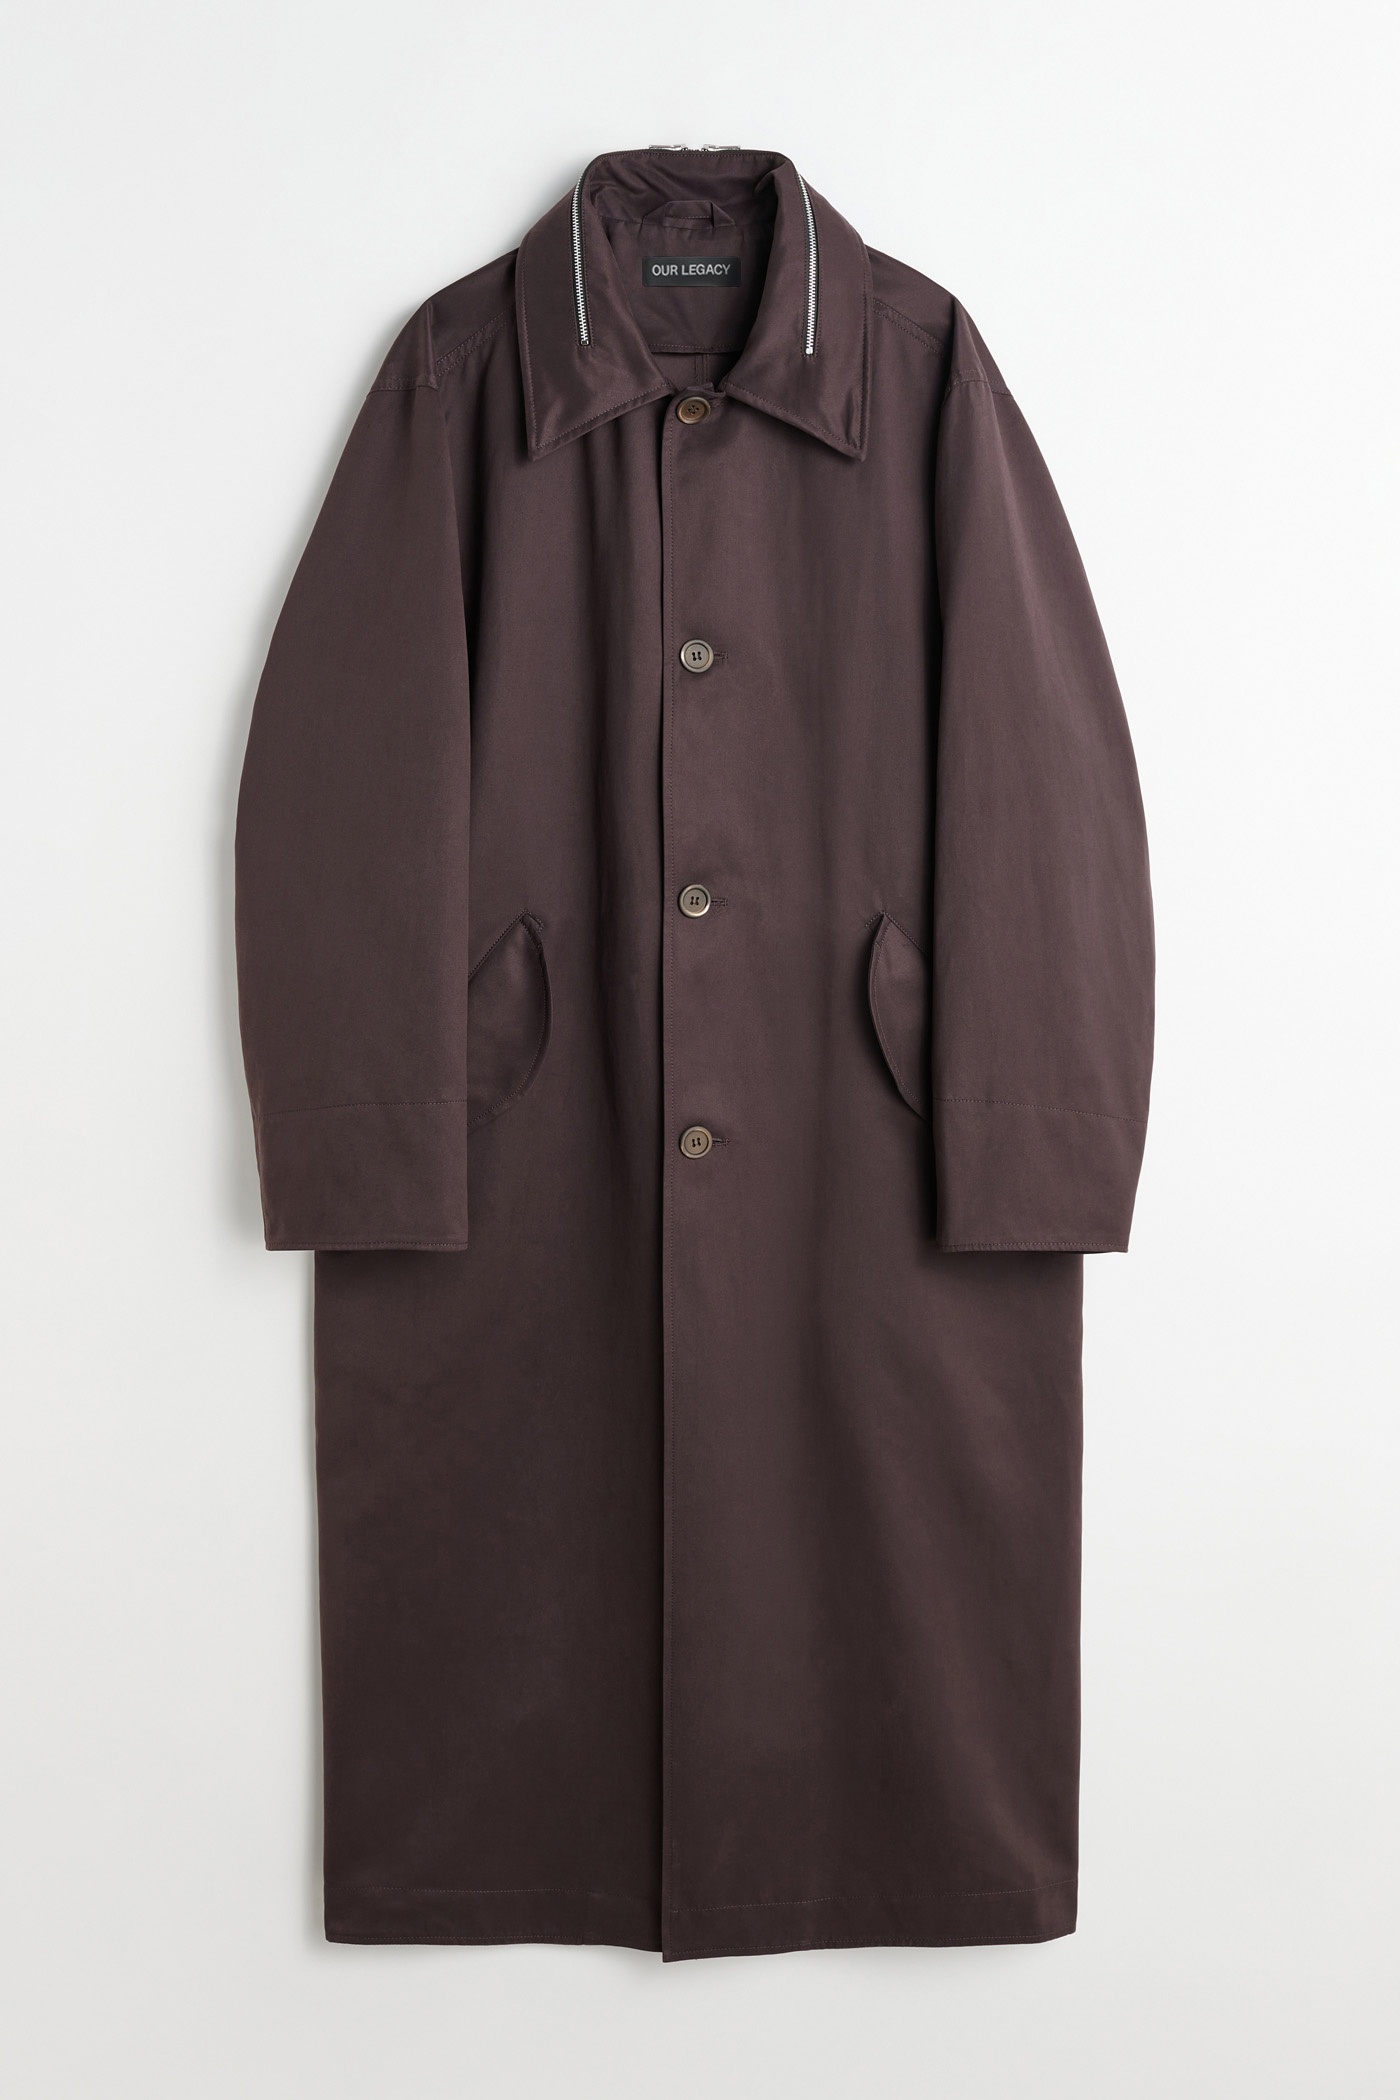 Emerge Coat Profound Brown Peached Tech - 6